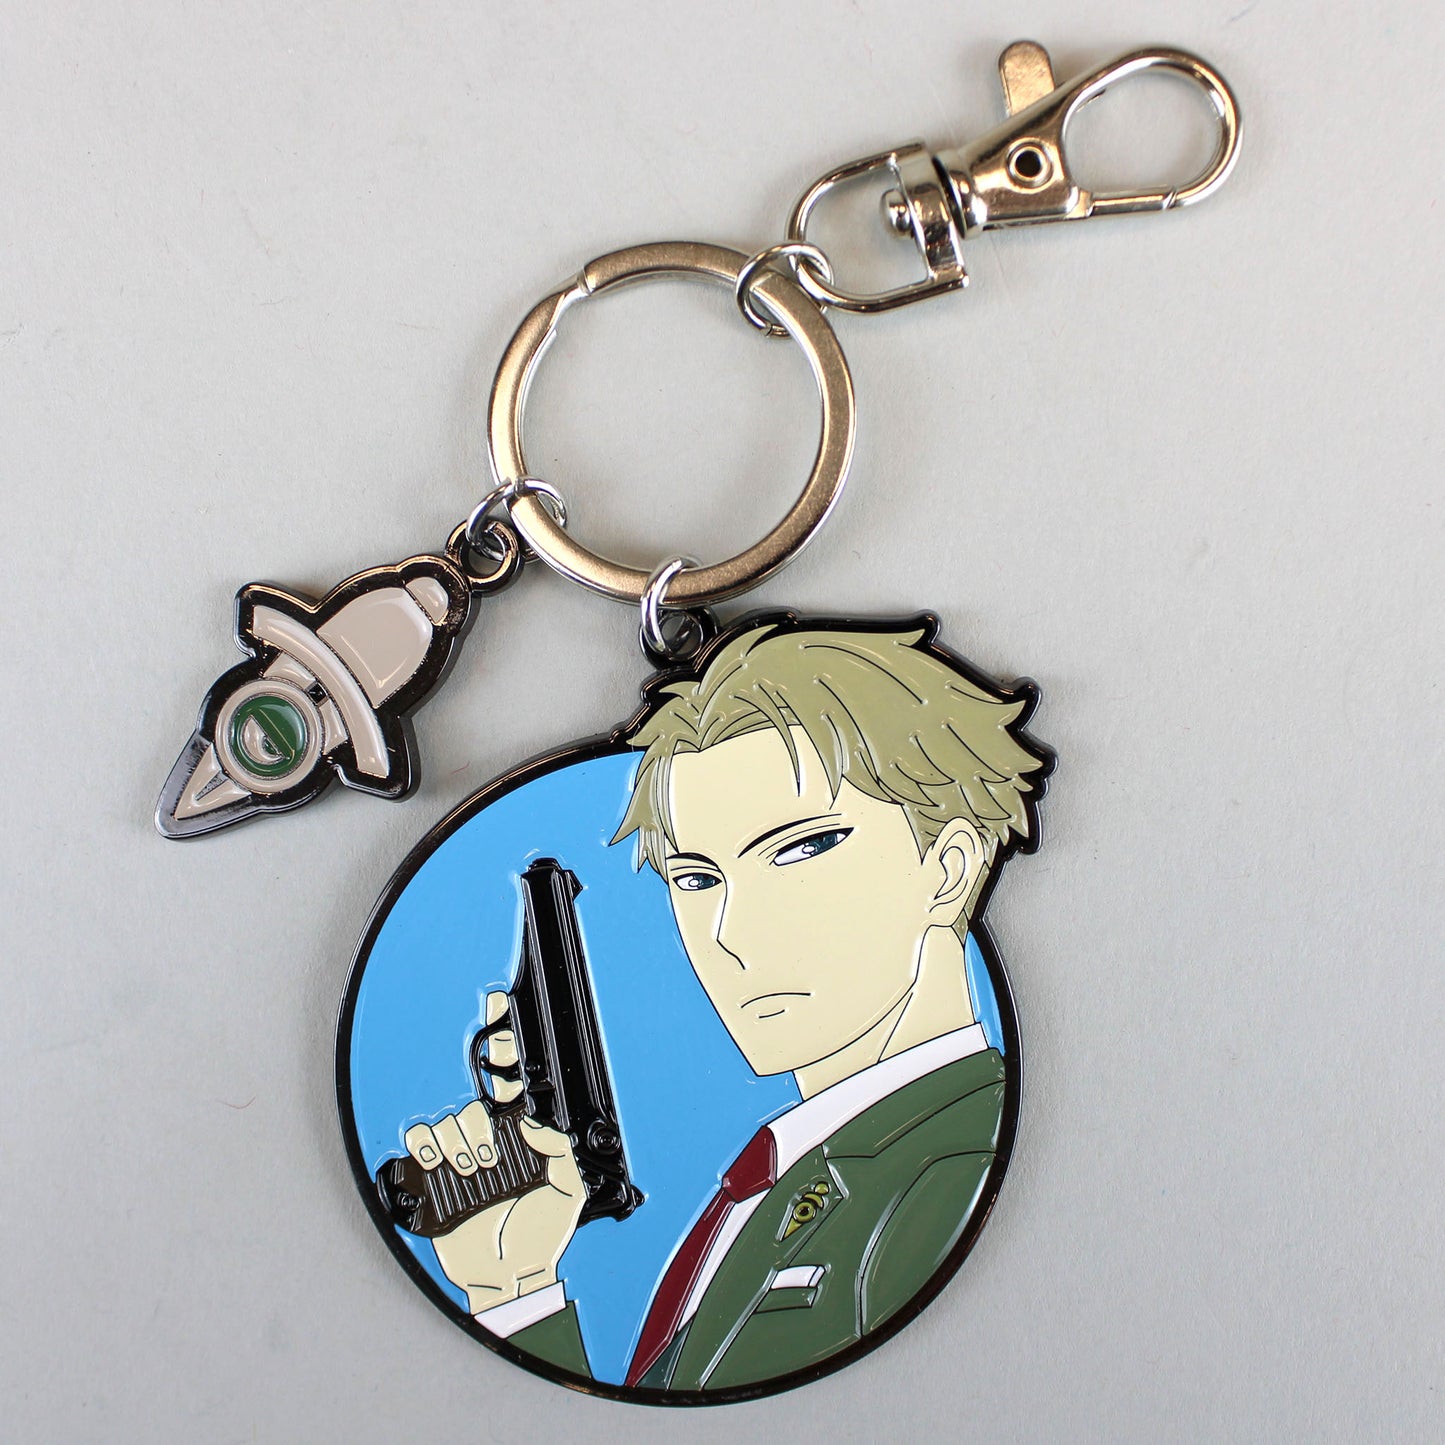 Loid Forger (Spy x Family) Large Metal Enamel Keychain